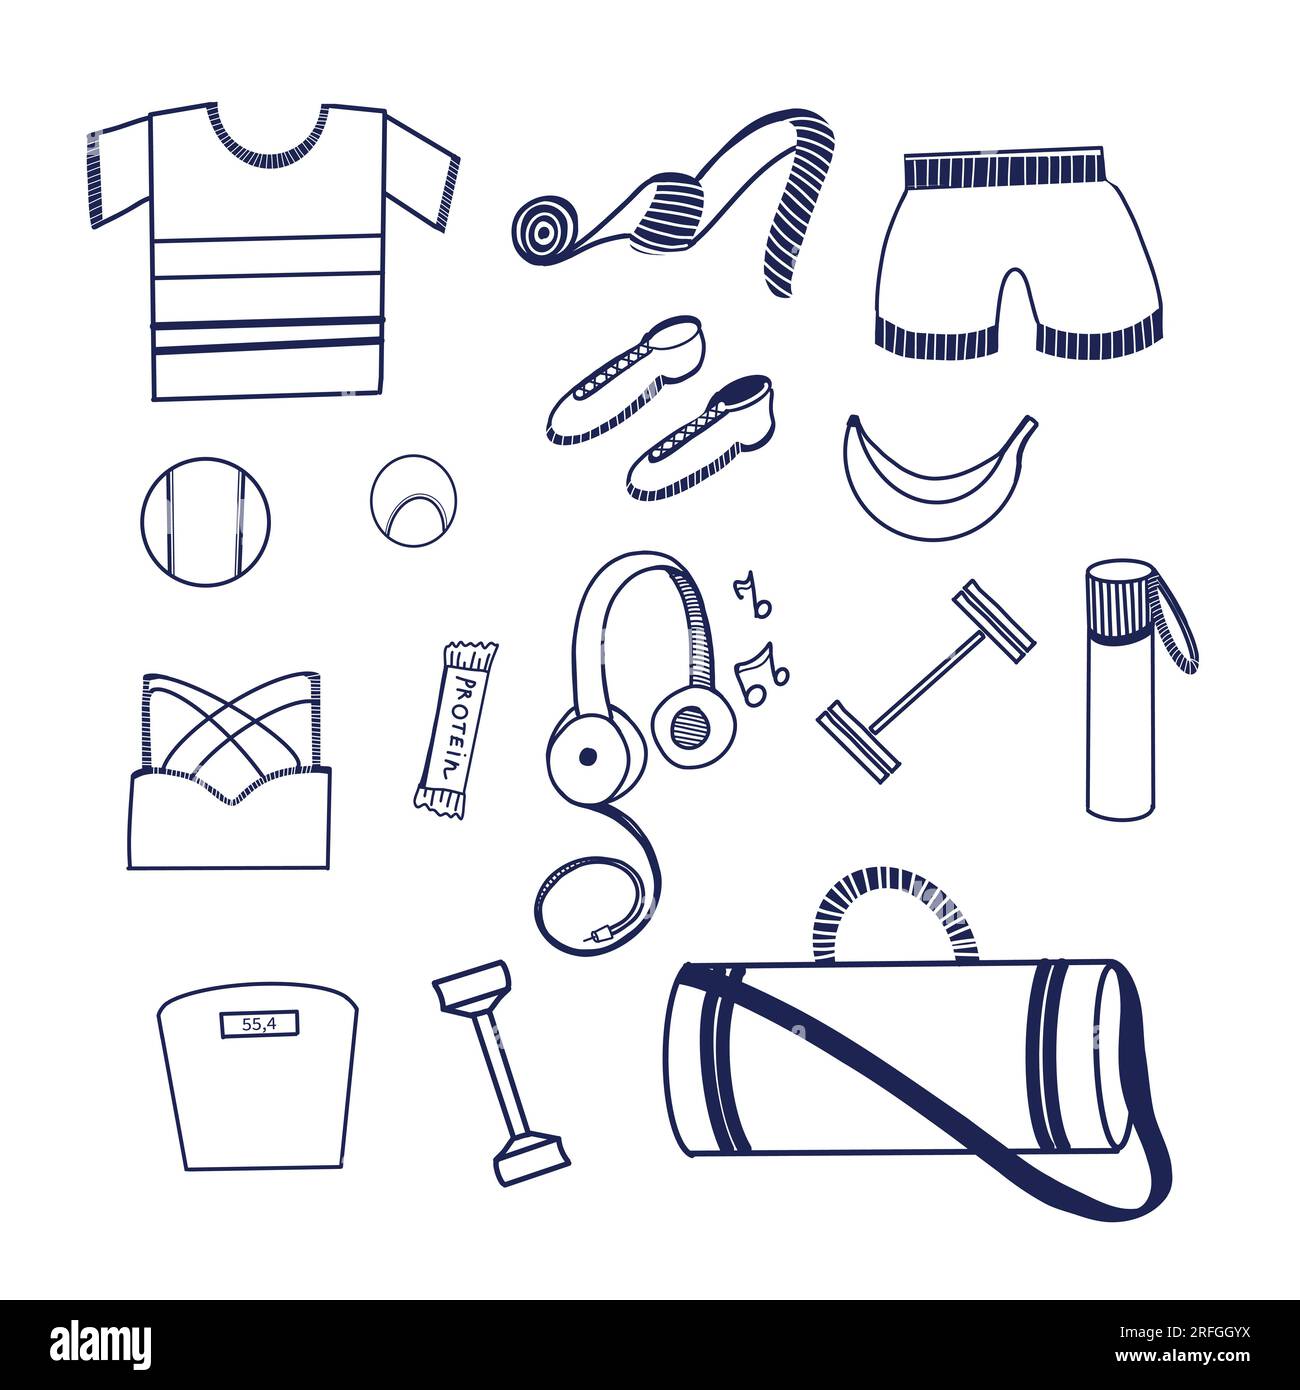 Set of illustrations. Sports equipment - tennis racket, dumbbells, bag, balls, jump rope, sneakers, scales, shorts, T-shirt, sports top drawn in vecto Stock Vector